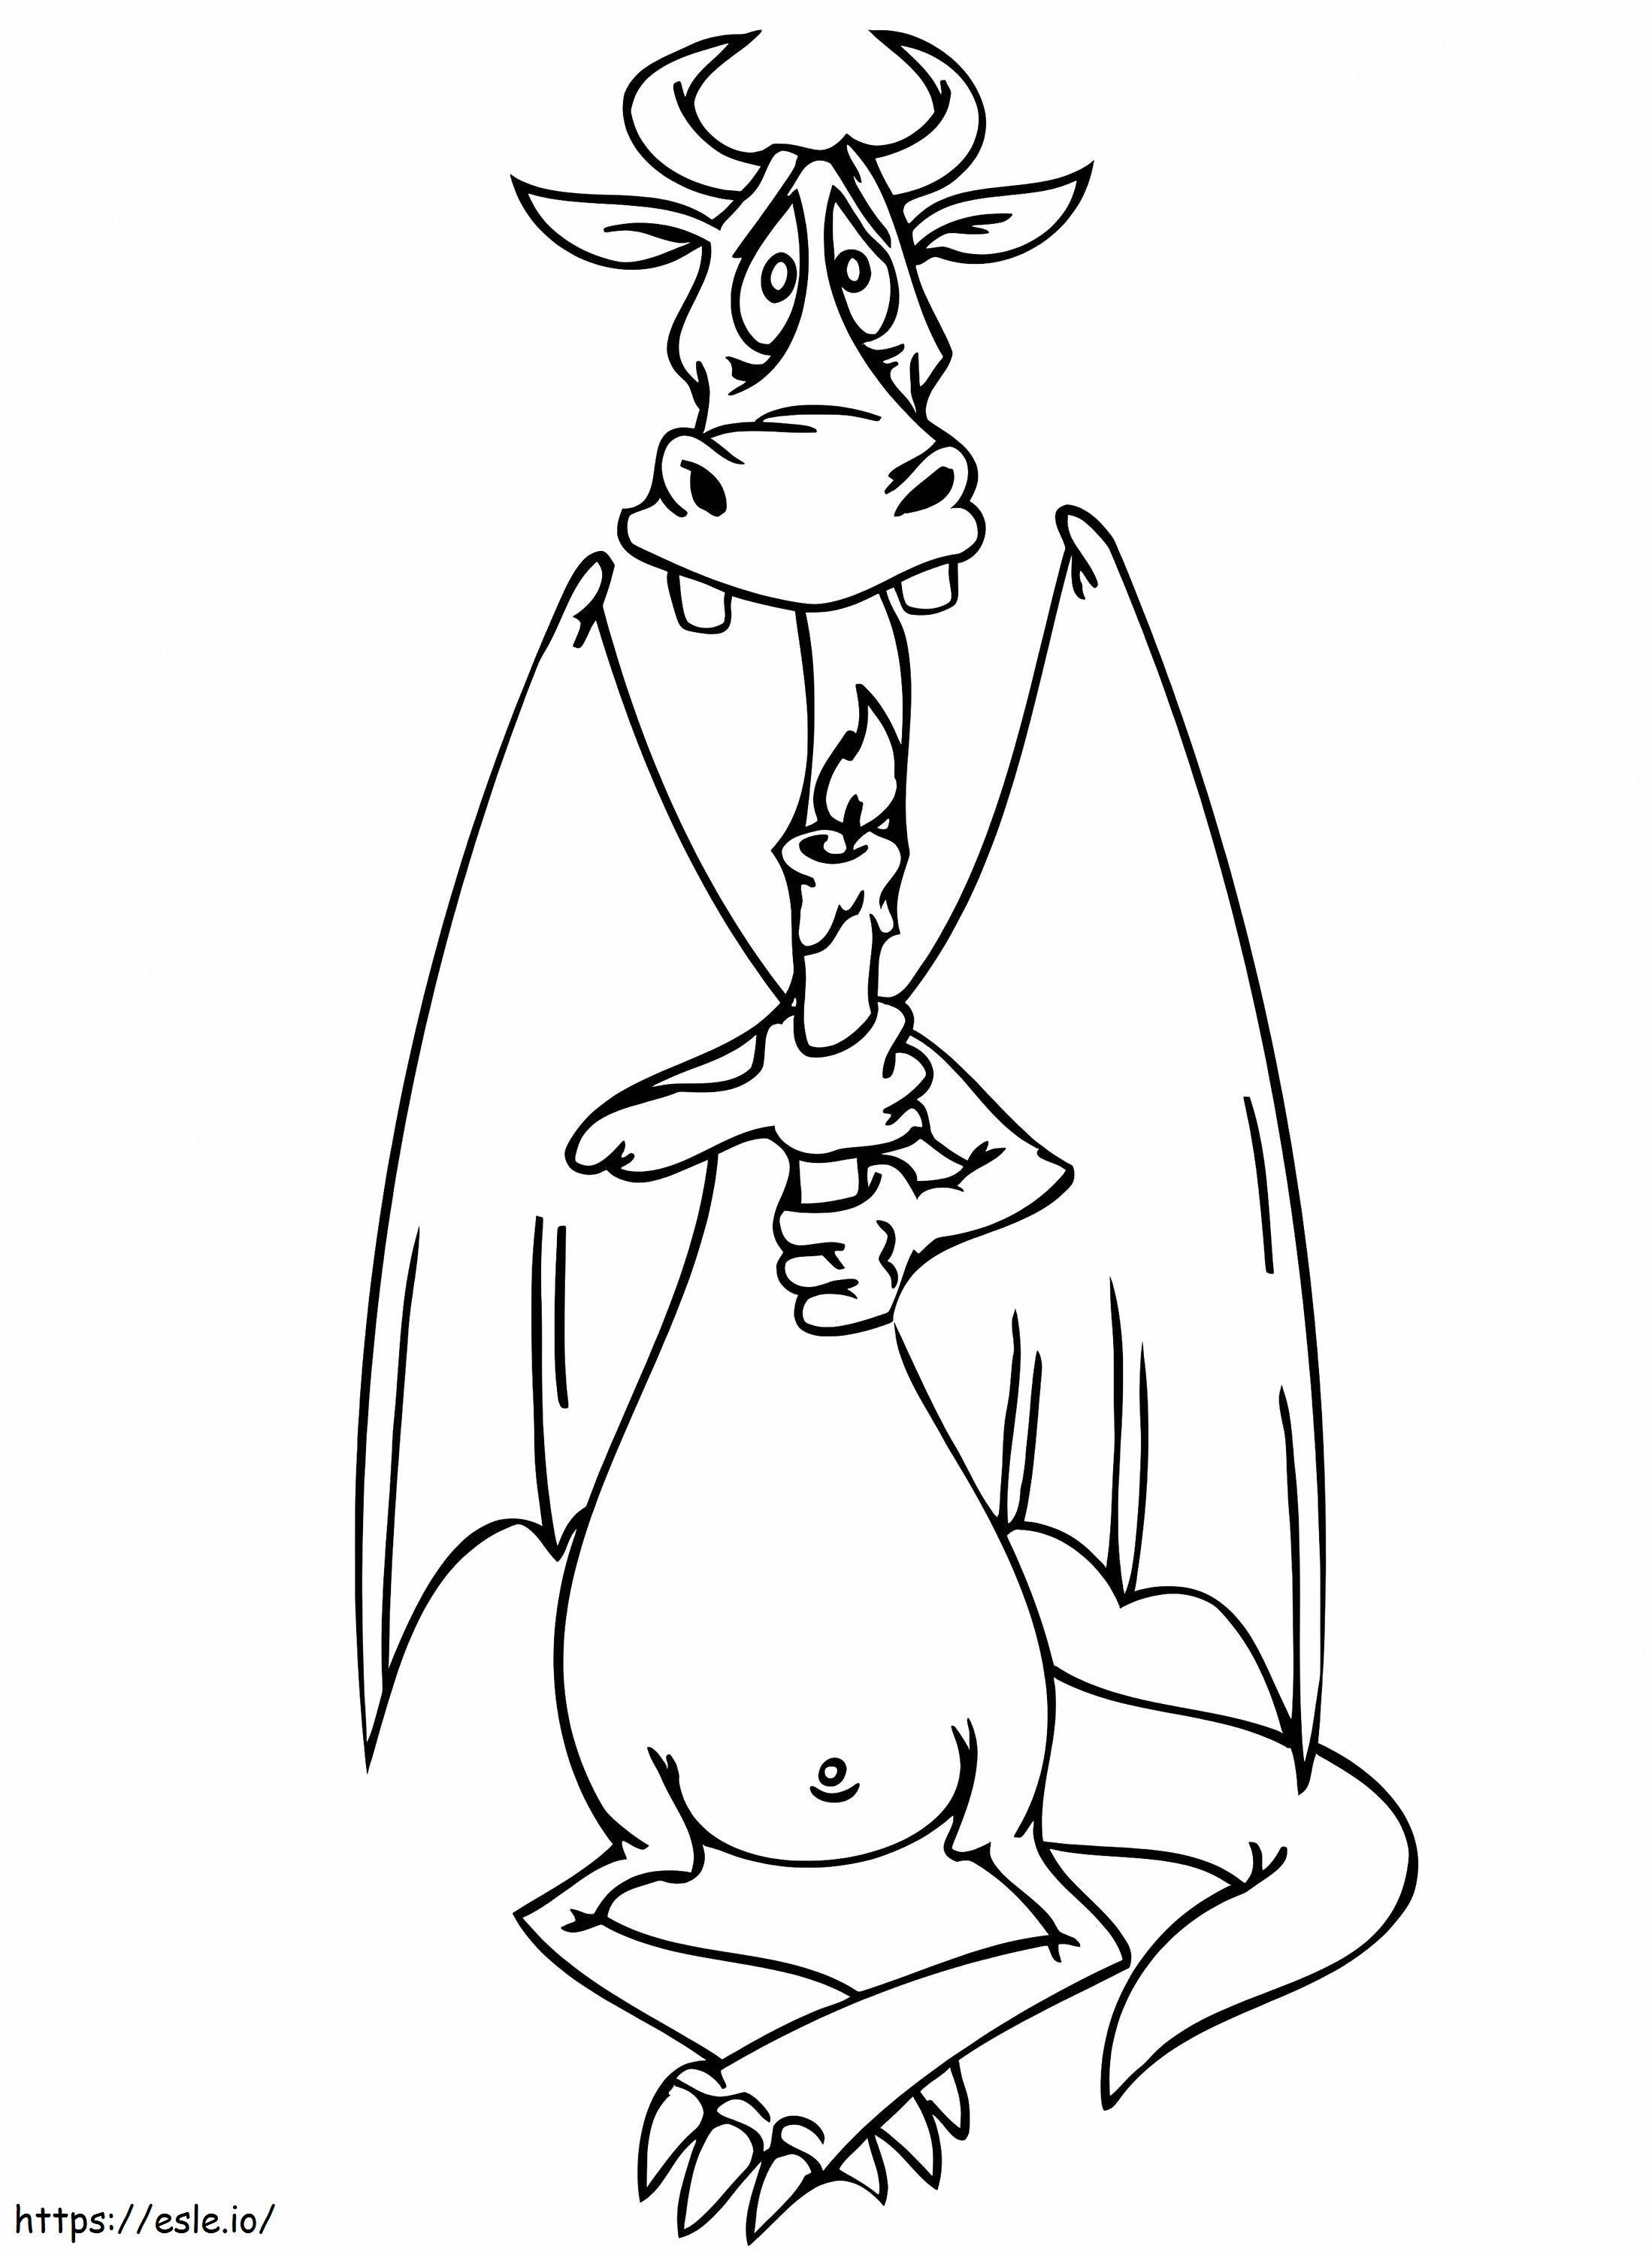 Dragon With Candle coloring page